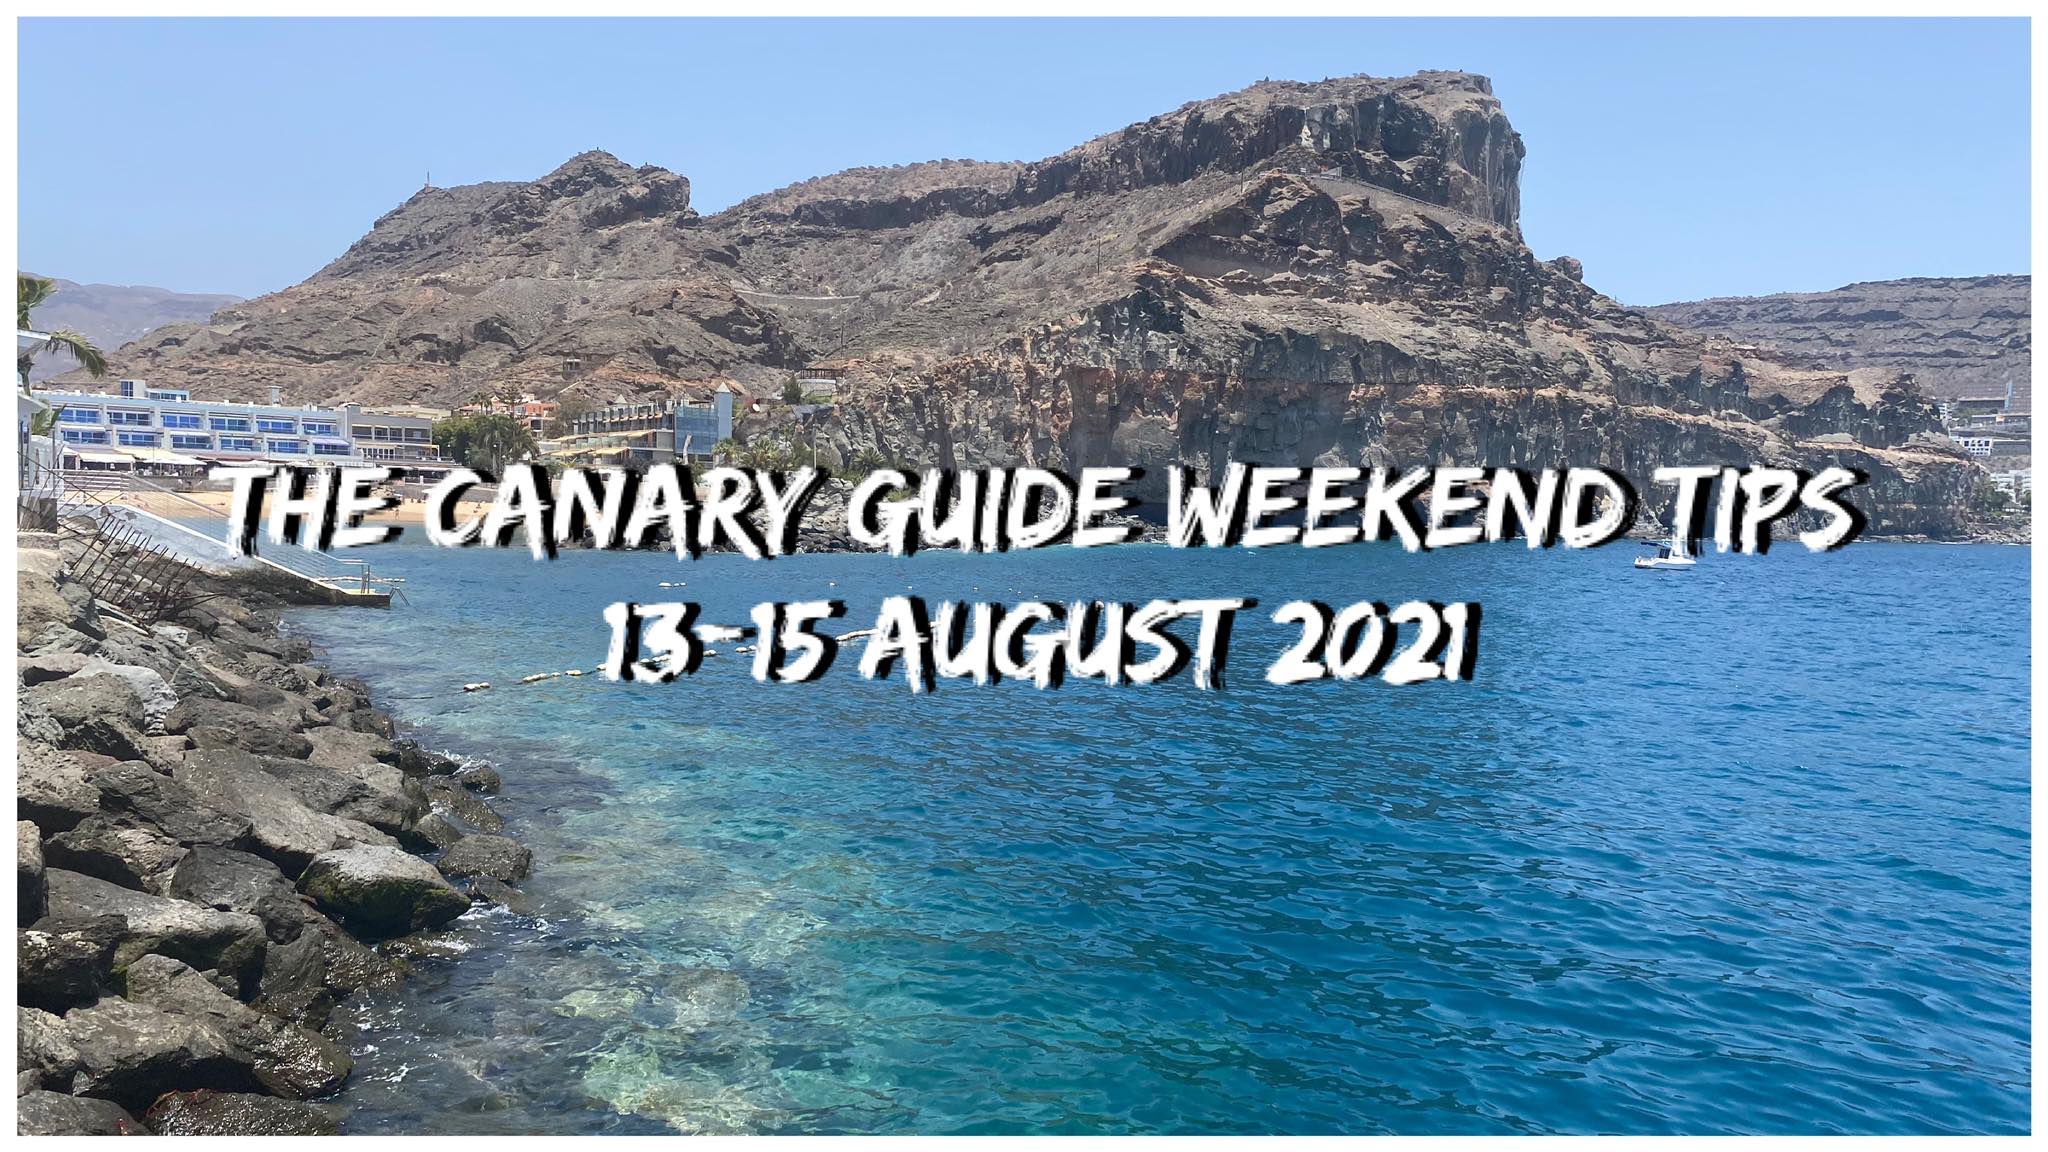 The Canary Guide Weekend Tips 13-15 August 2021